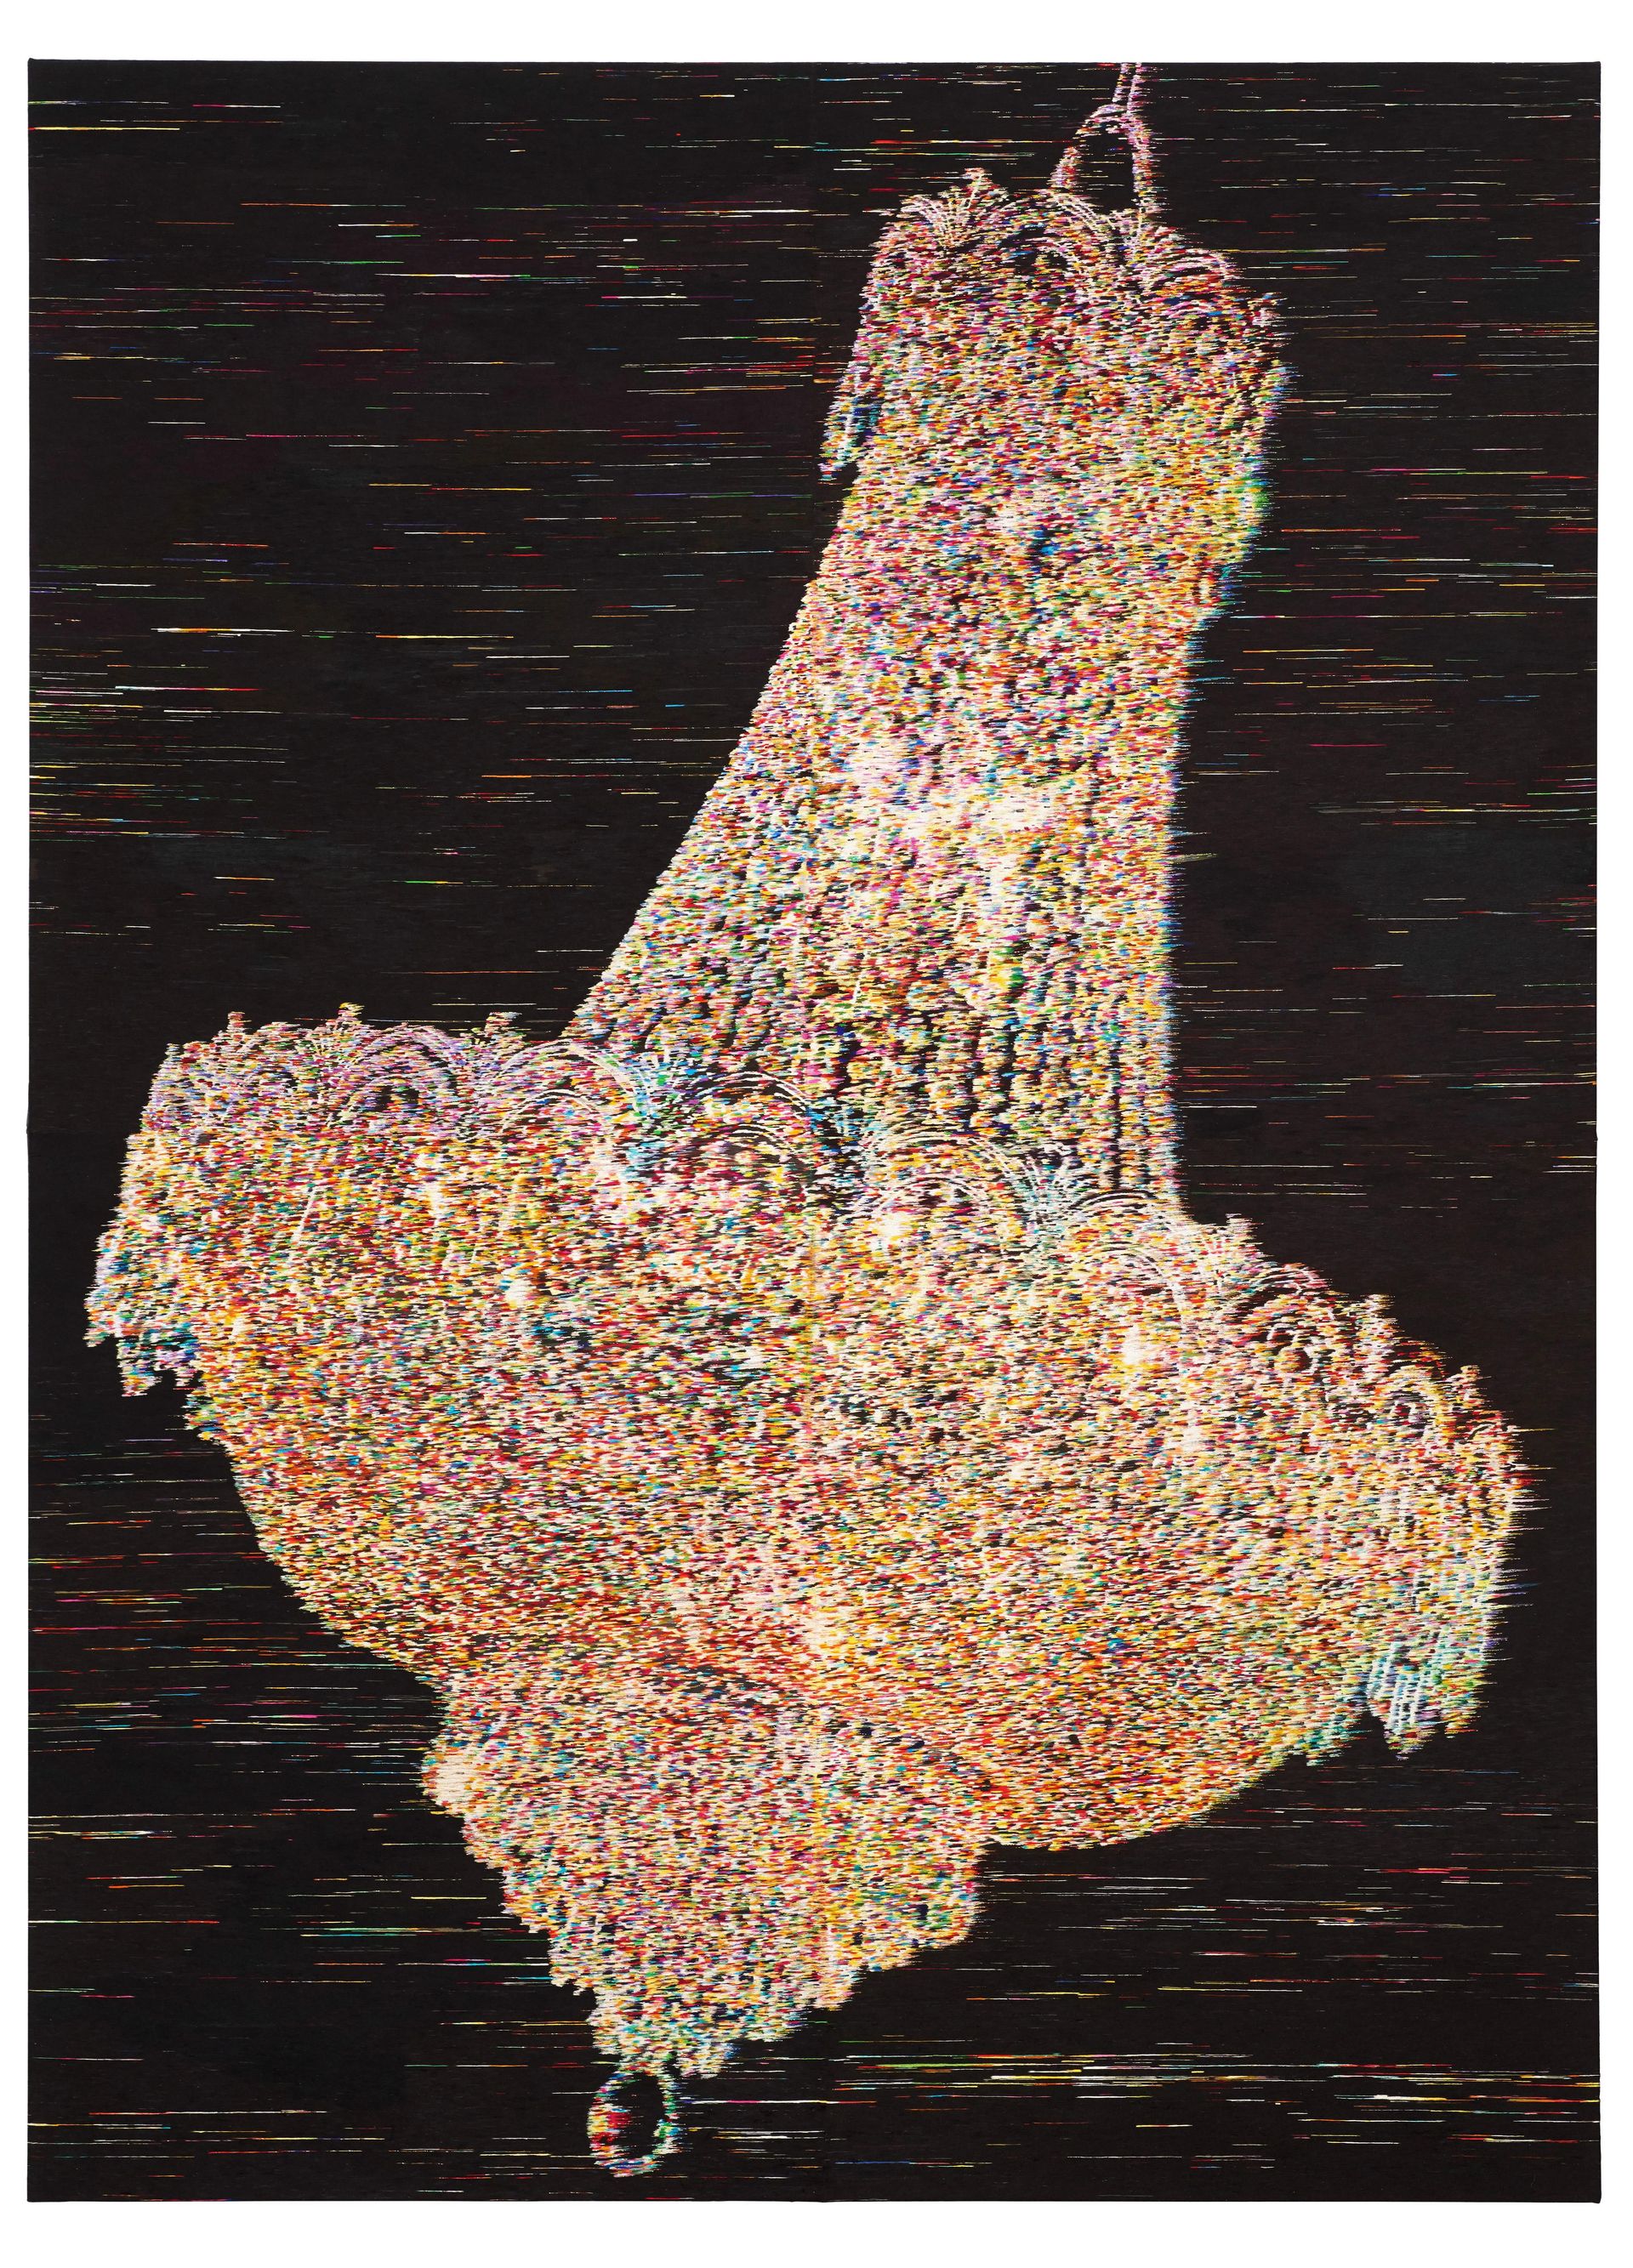 Kyungah Ham, What you see is the unseen / Chandeliers for Five Cities BK 03-05, 2016–17, North Korean hand embroidery, silk threads on cotton, middle man, anxiety, censorship, ideology, wooden frame, appox. 2200 hrs., 2 persons, 245 × 180 cm, Courtesy the artist and Kukje Gallery, Seoul, carlier | gebauer, Berlin/Madrid